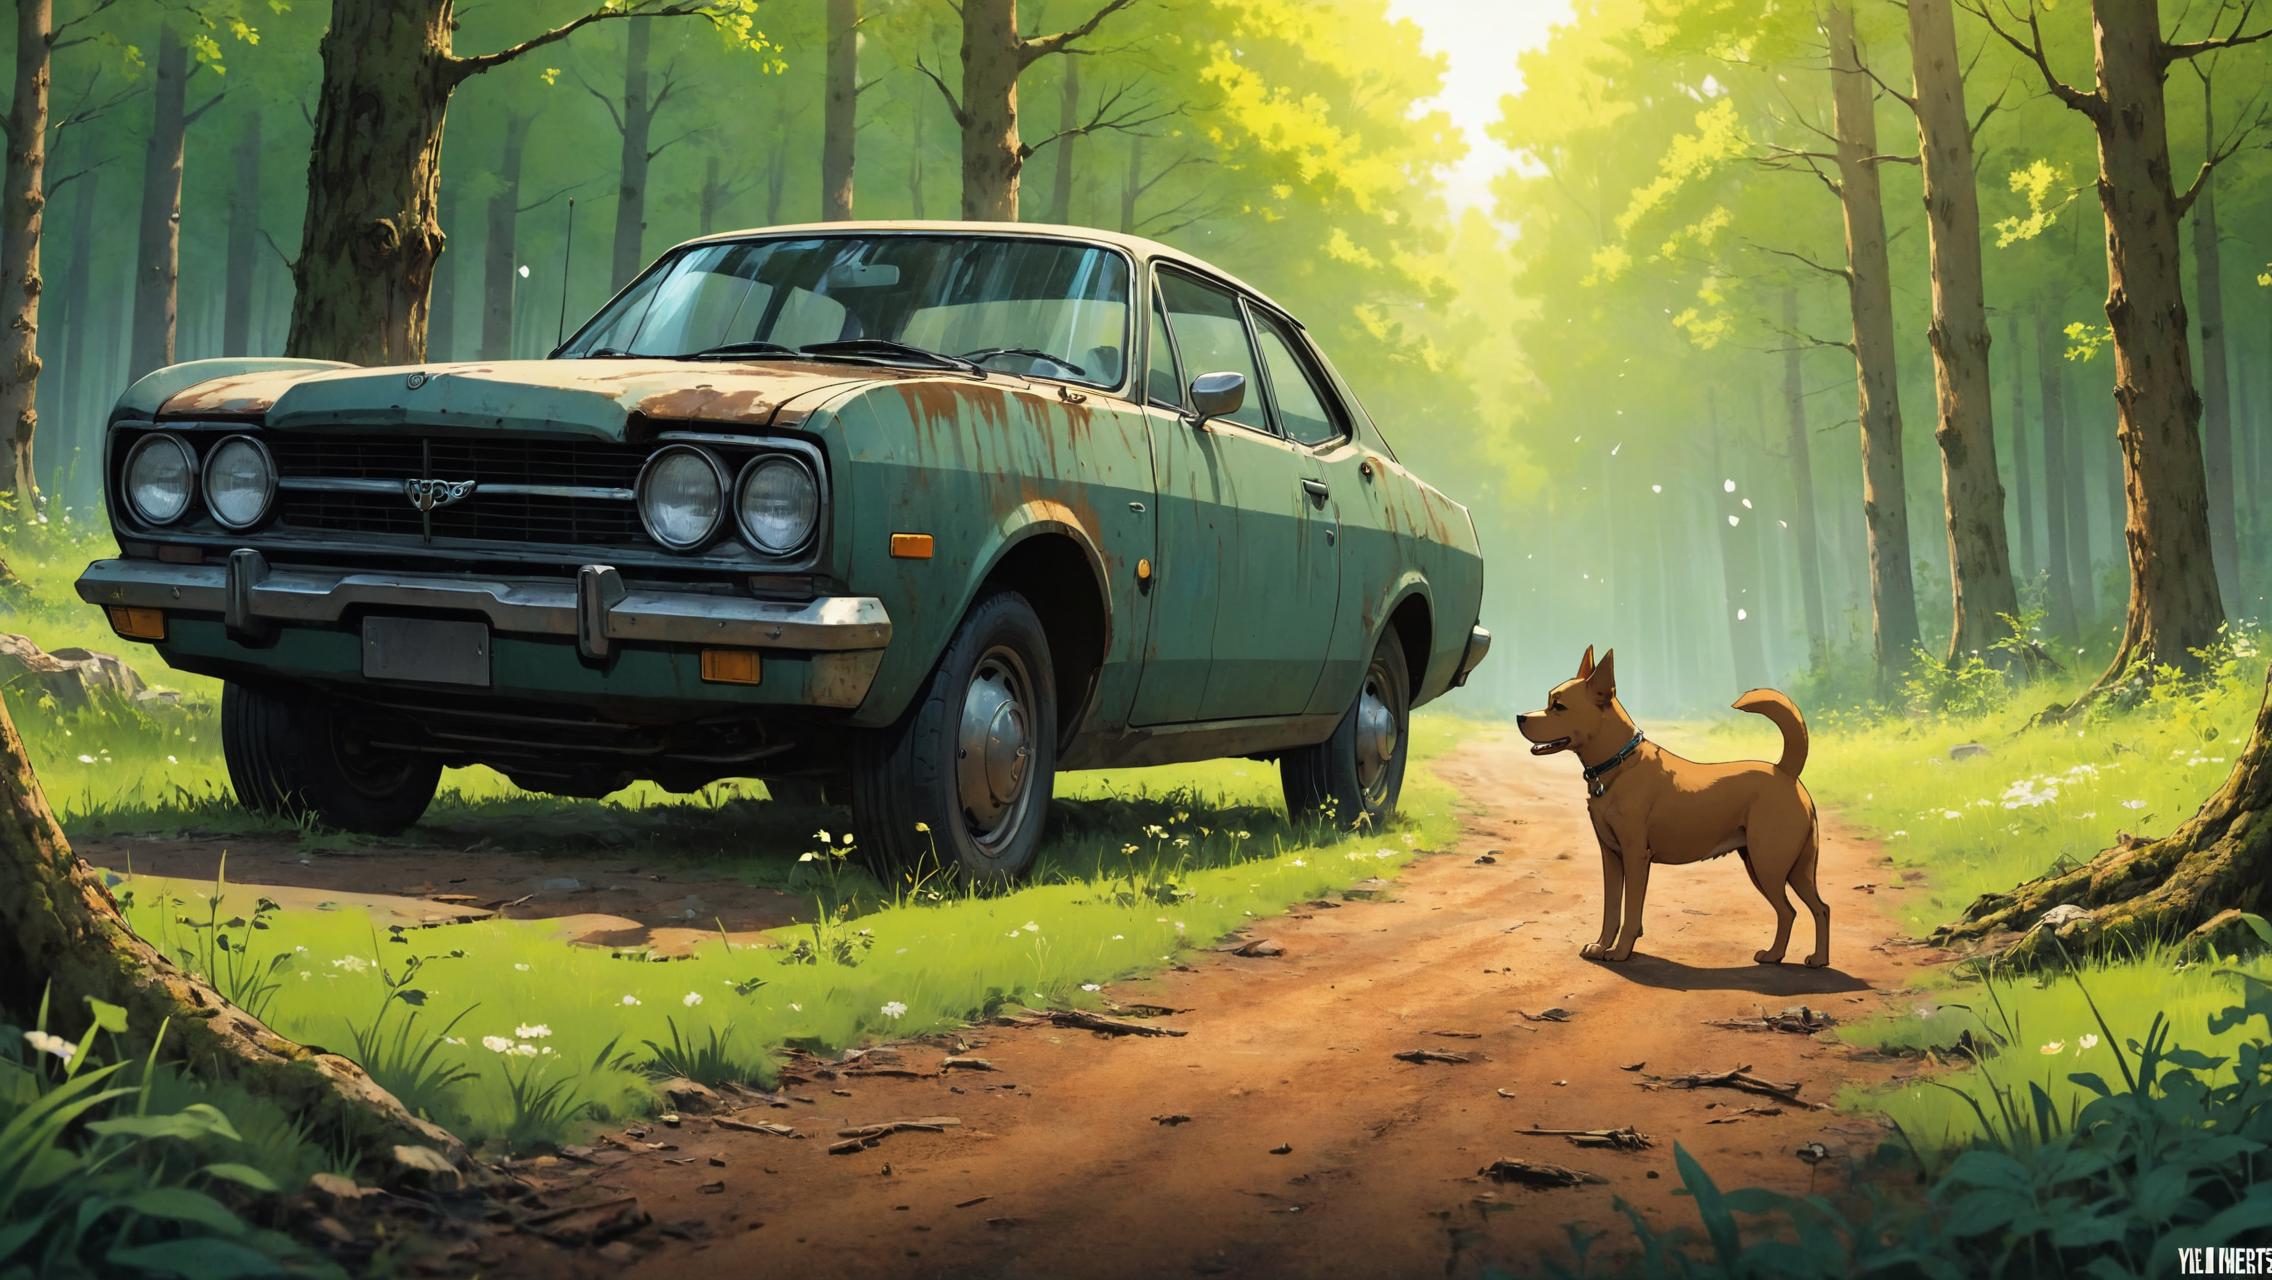 A rusty blue car parked near a dirt road with a brown dog standing in front of it.